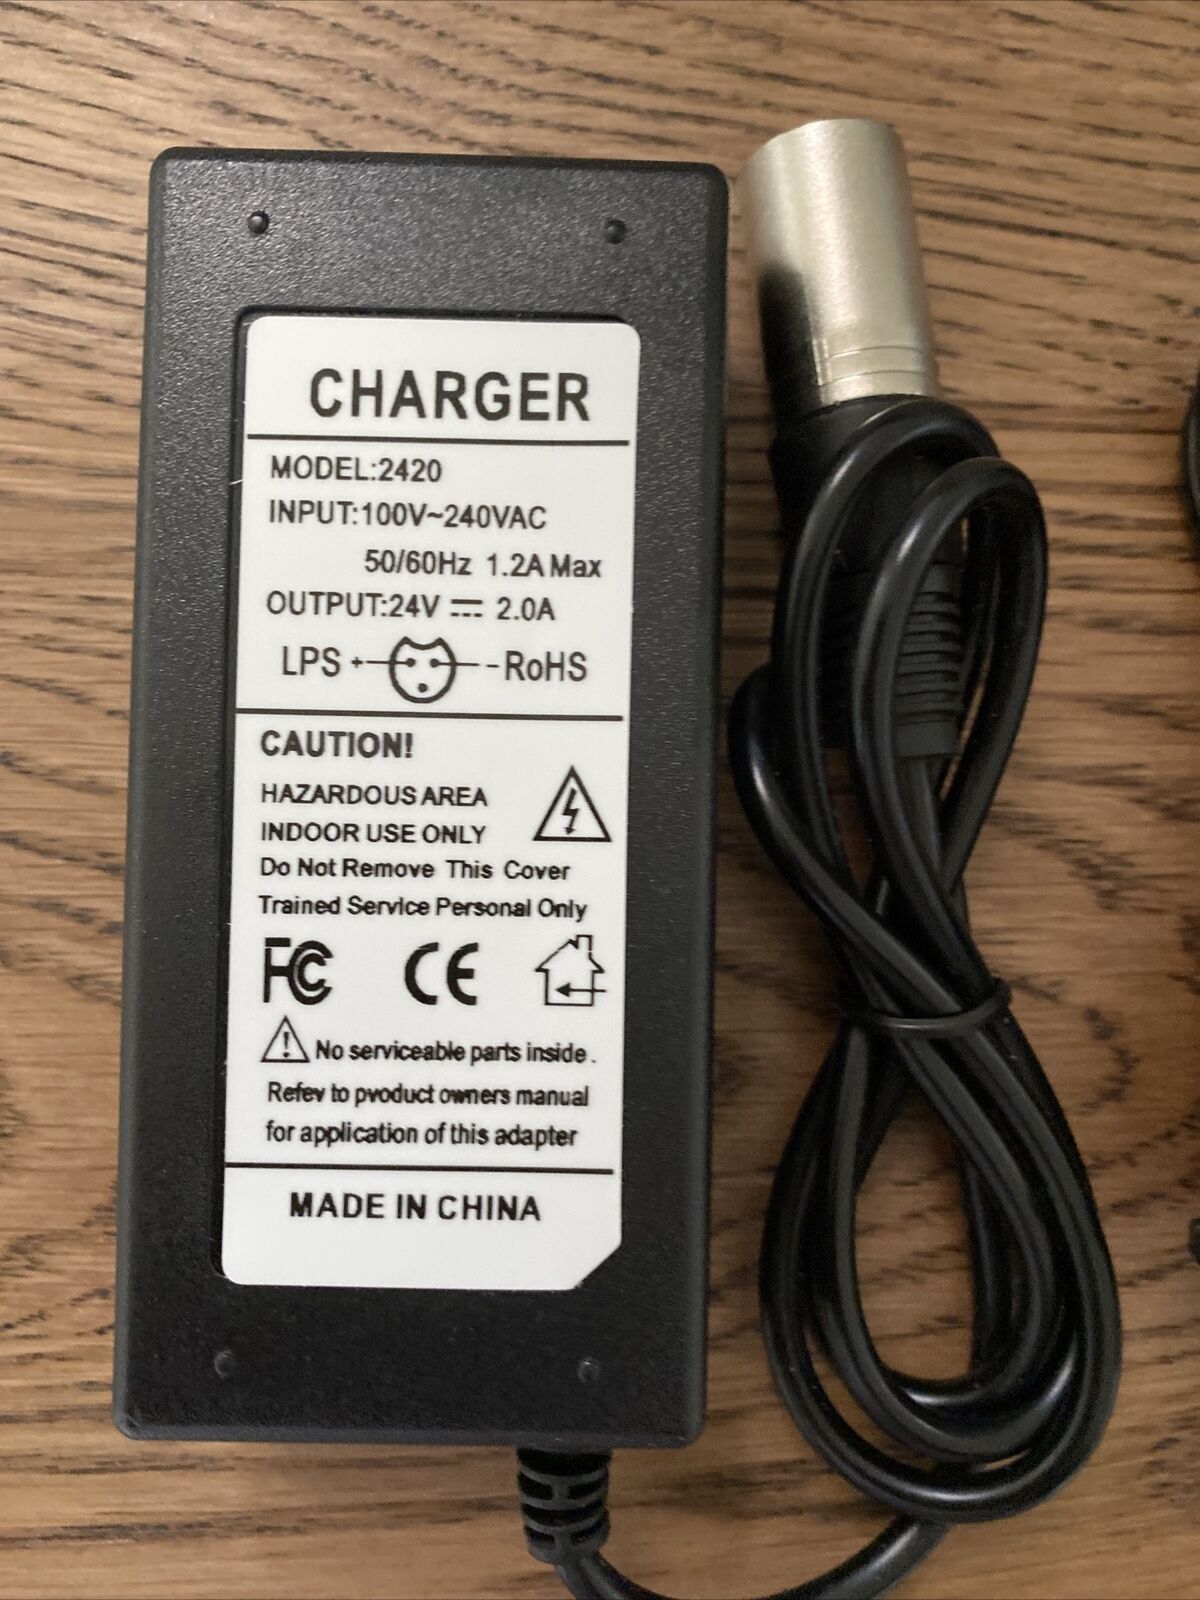 24V 2A Battery Charger for Schwinn MISSILE FS NEW FRONTIER F-18 FLY FS Scooter Item SpecificationInput: AC 100-240V 50